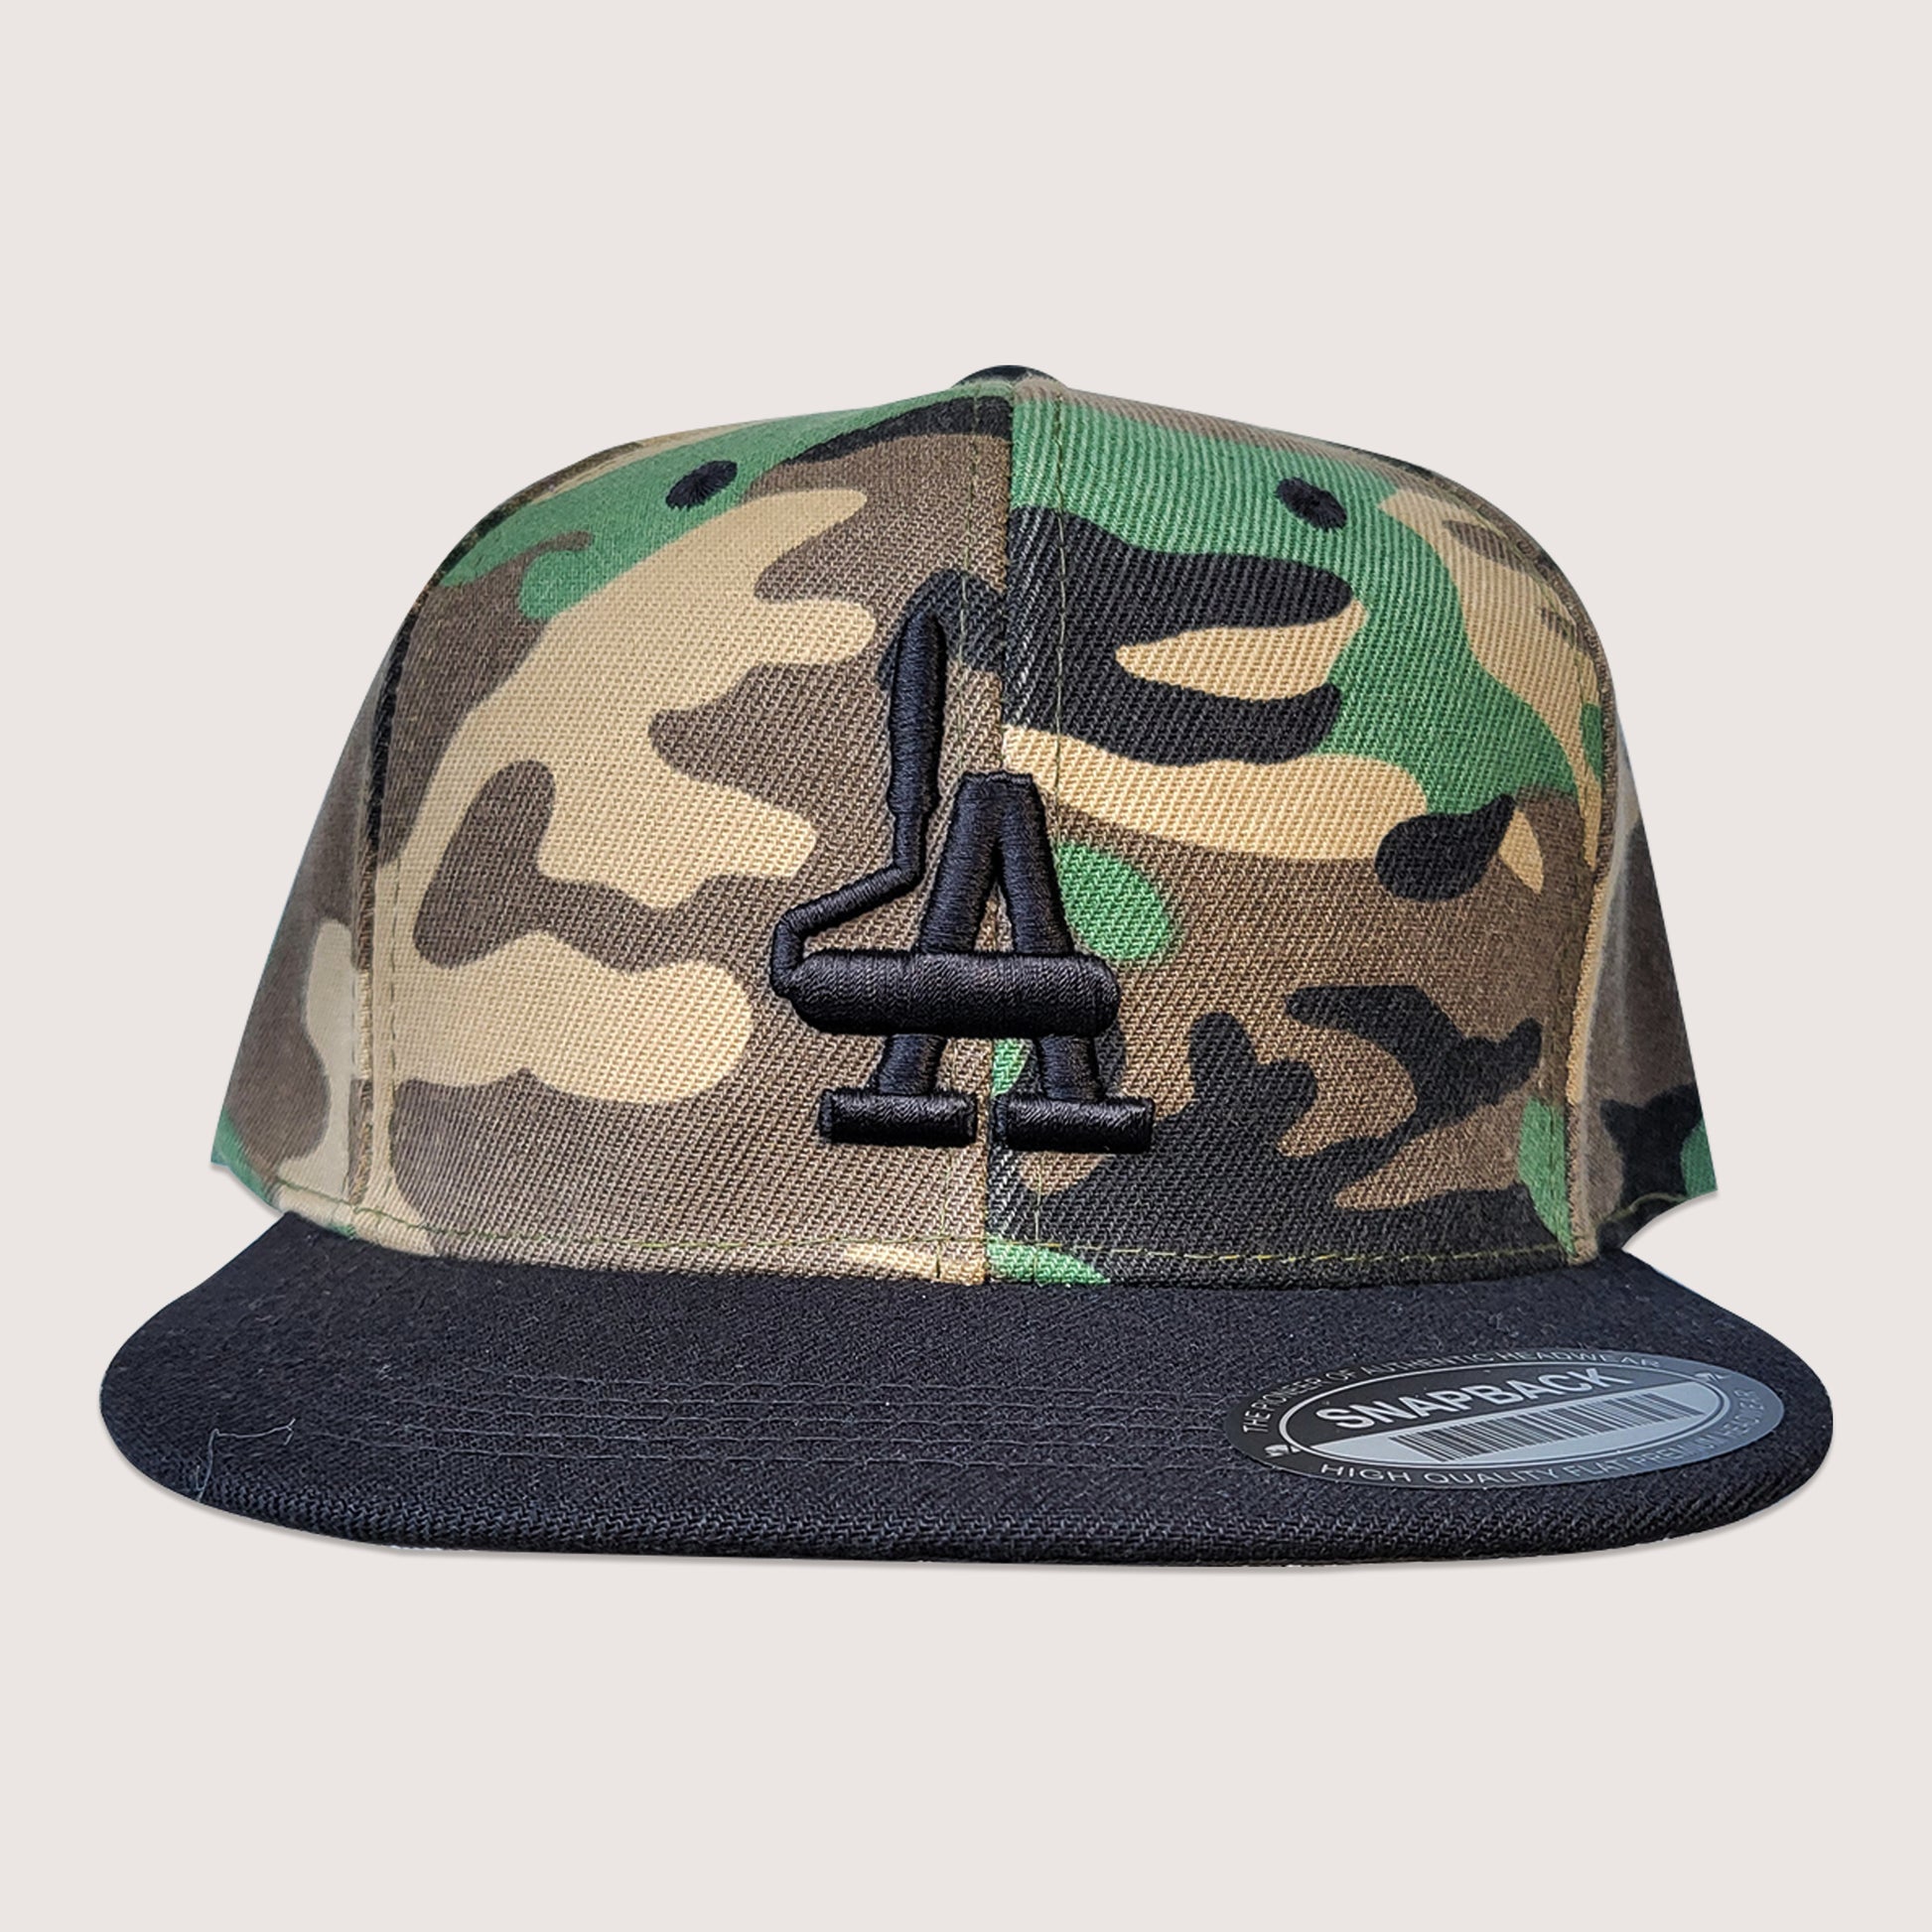 Phatcaps brand baseball cap in camo with black embroidery